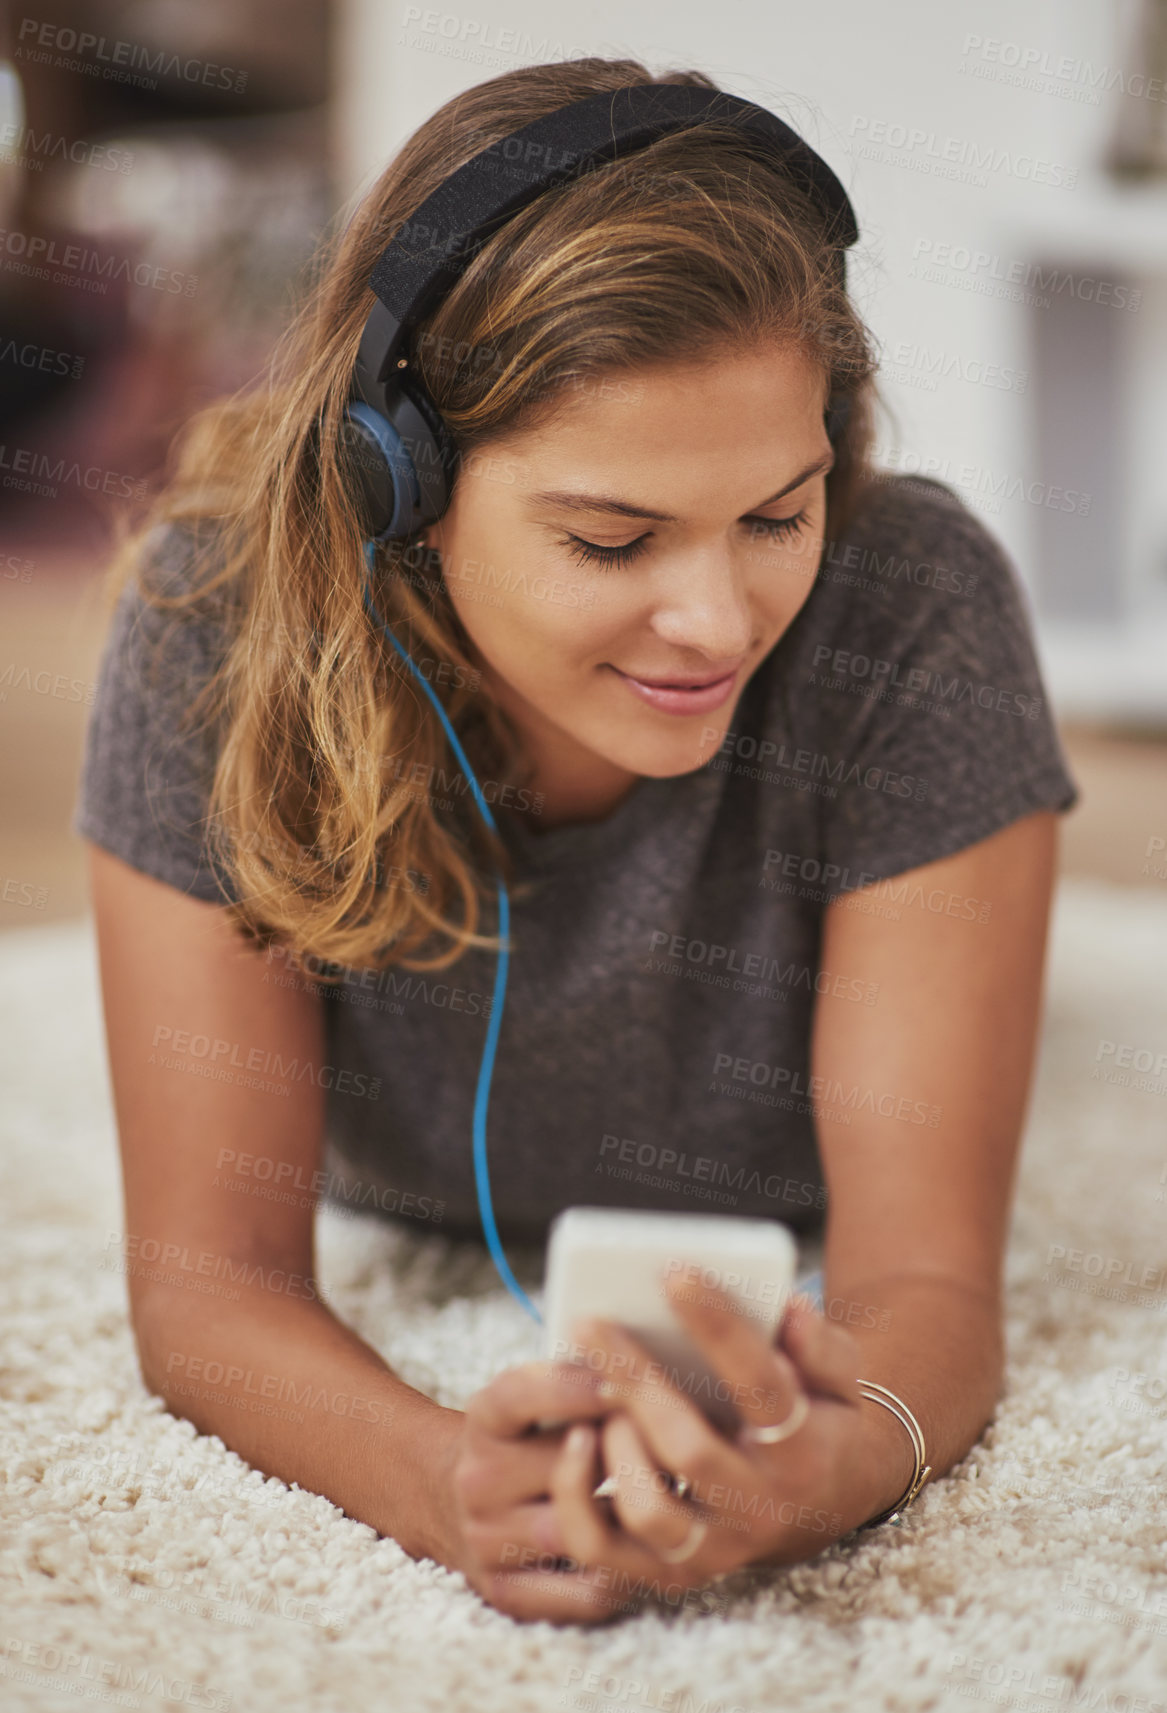 Buy stock photo Shot of a young woman relaxing at home and listening to music on her phone